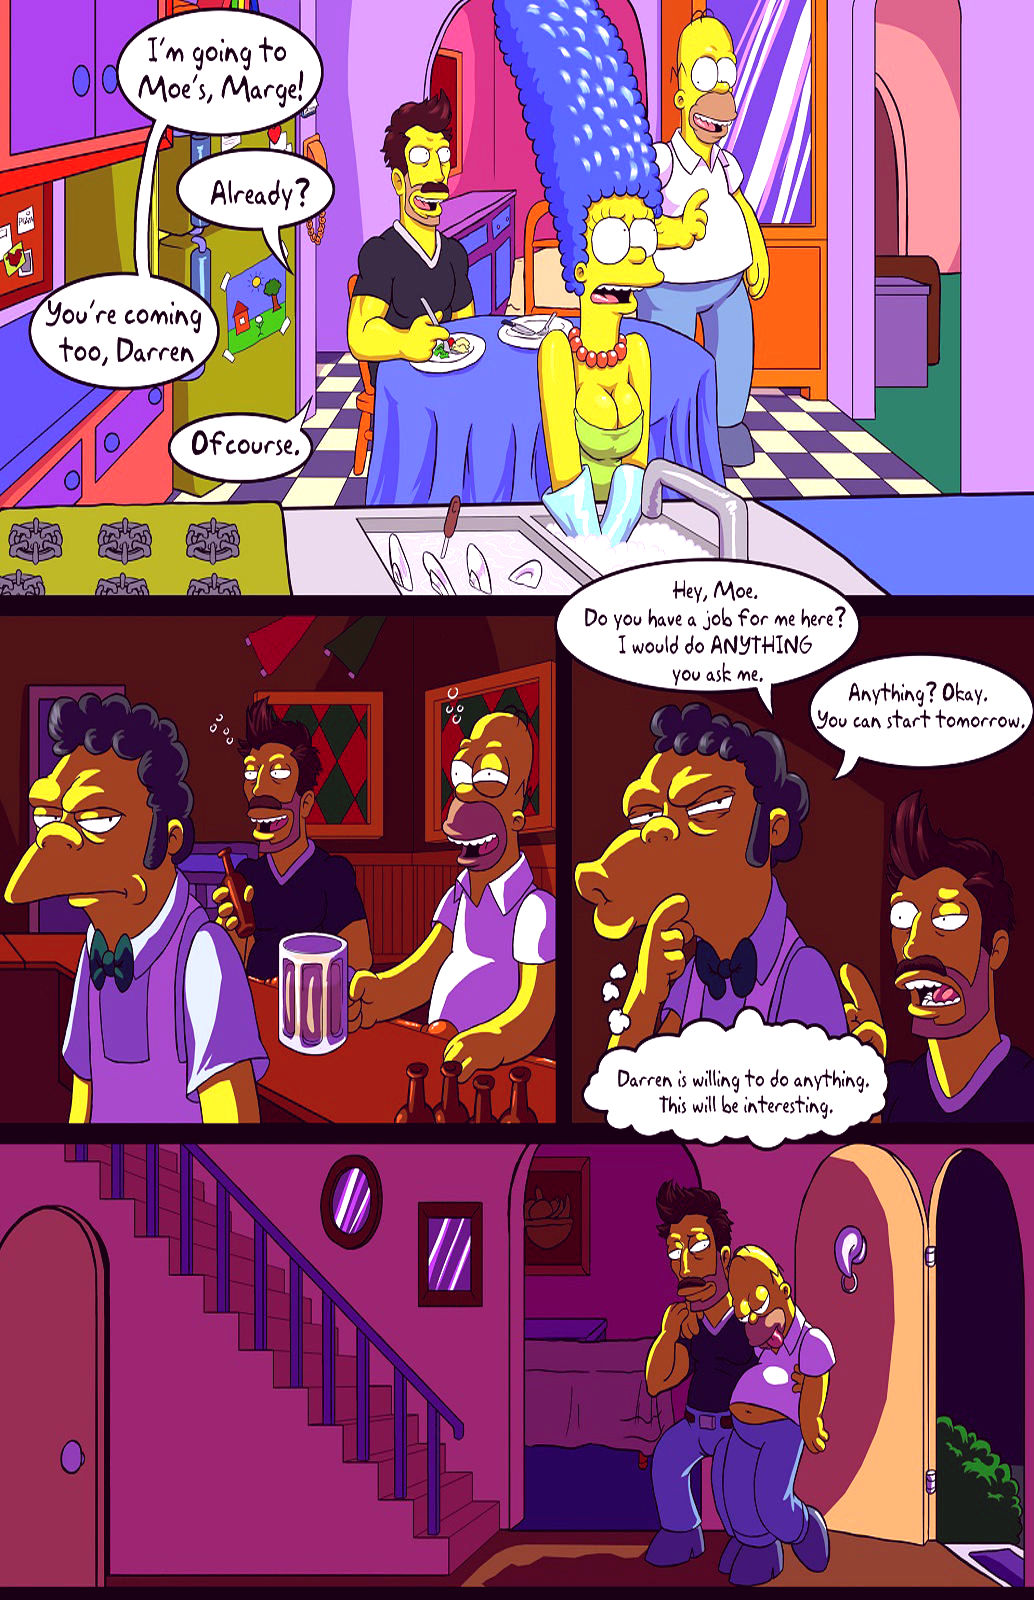 Darrens adventure or welcome to springfield porn comic picture 6